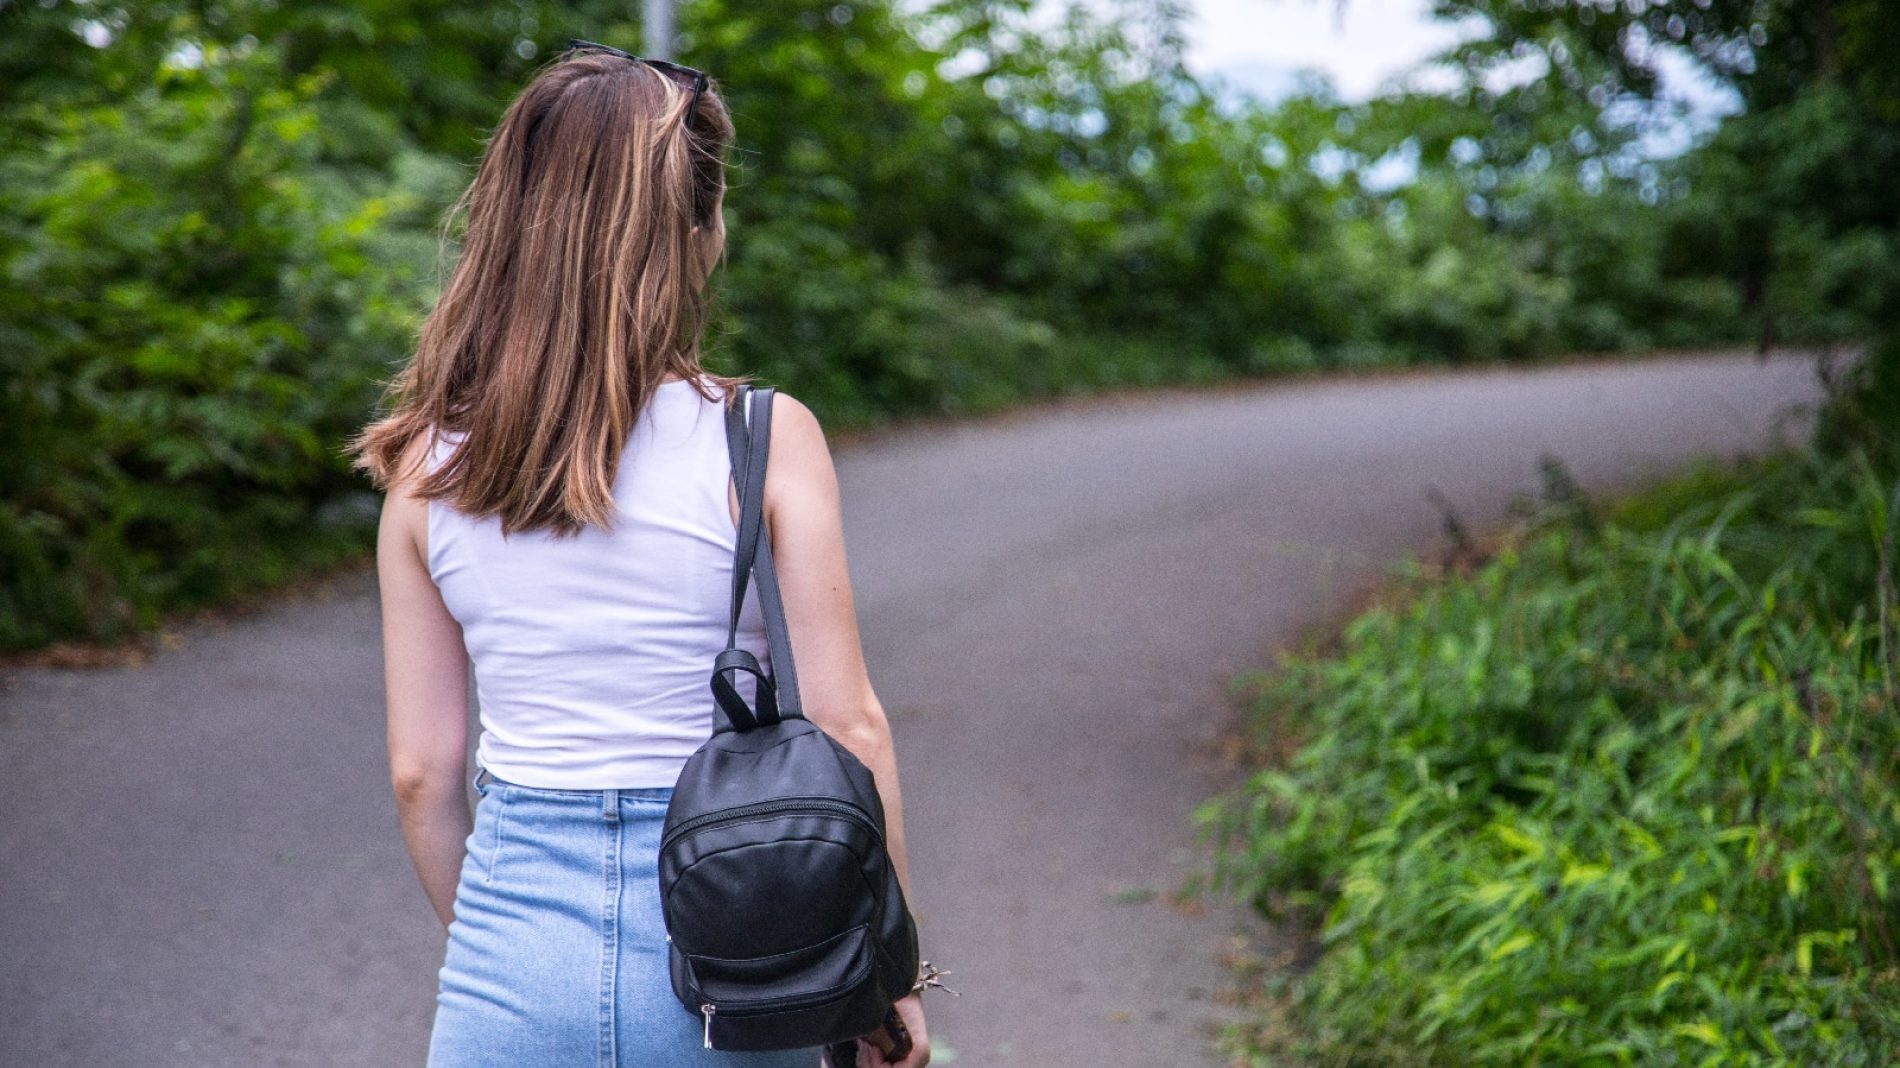 a feminine presenting person with a backpack walks along a path lined by shrubs